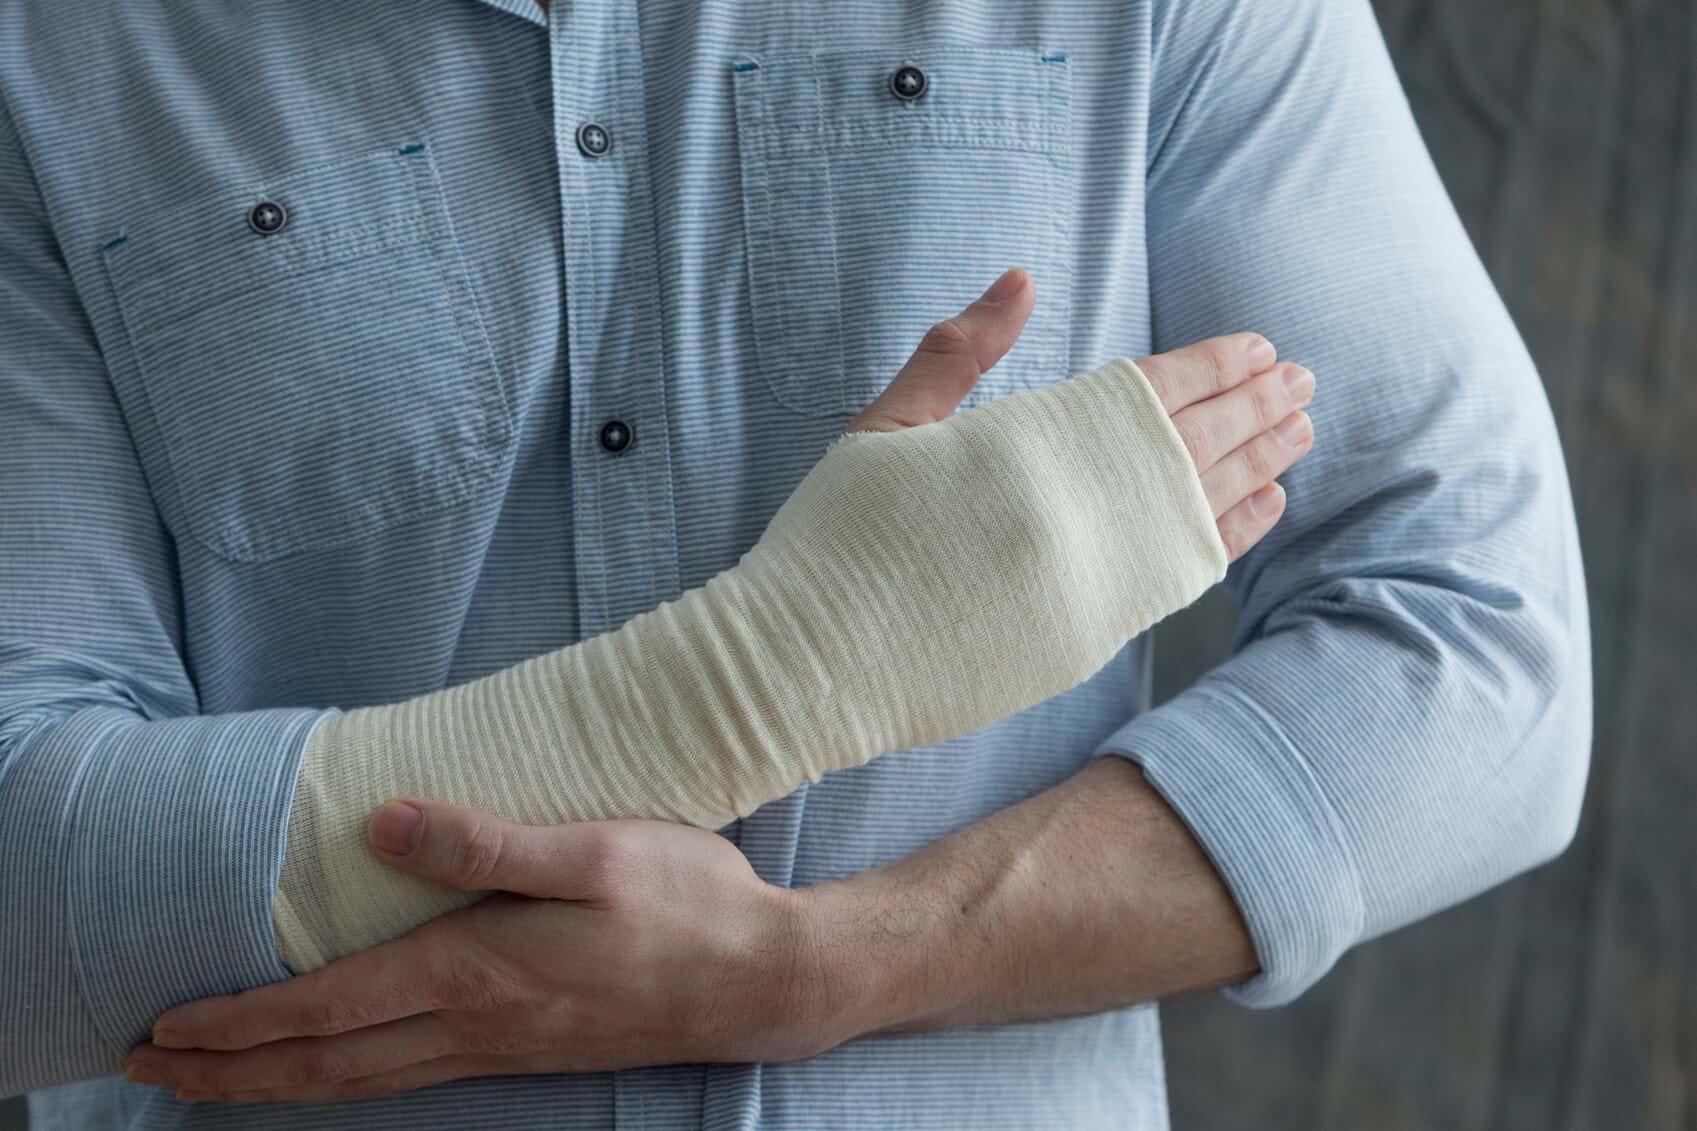 A man holds his bandaged wrist